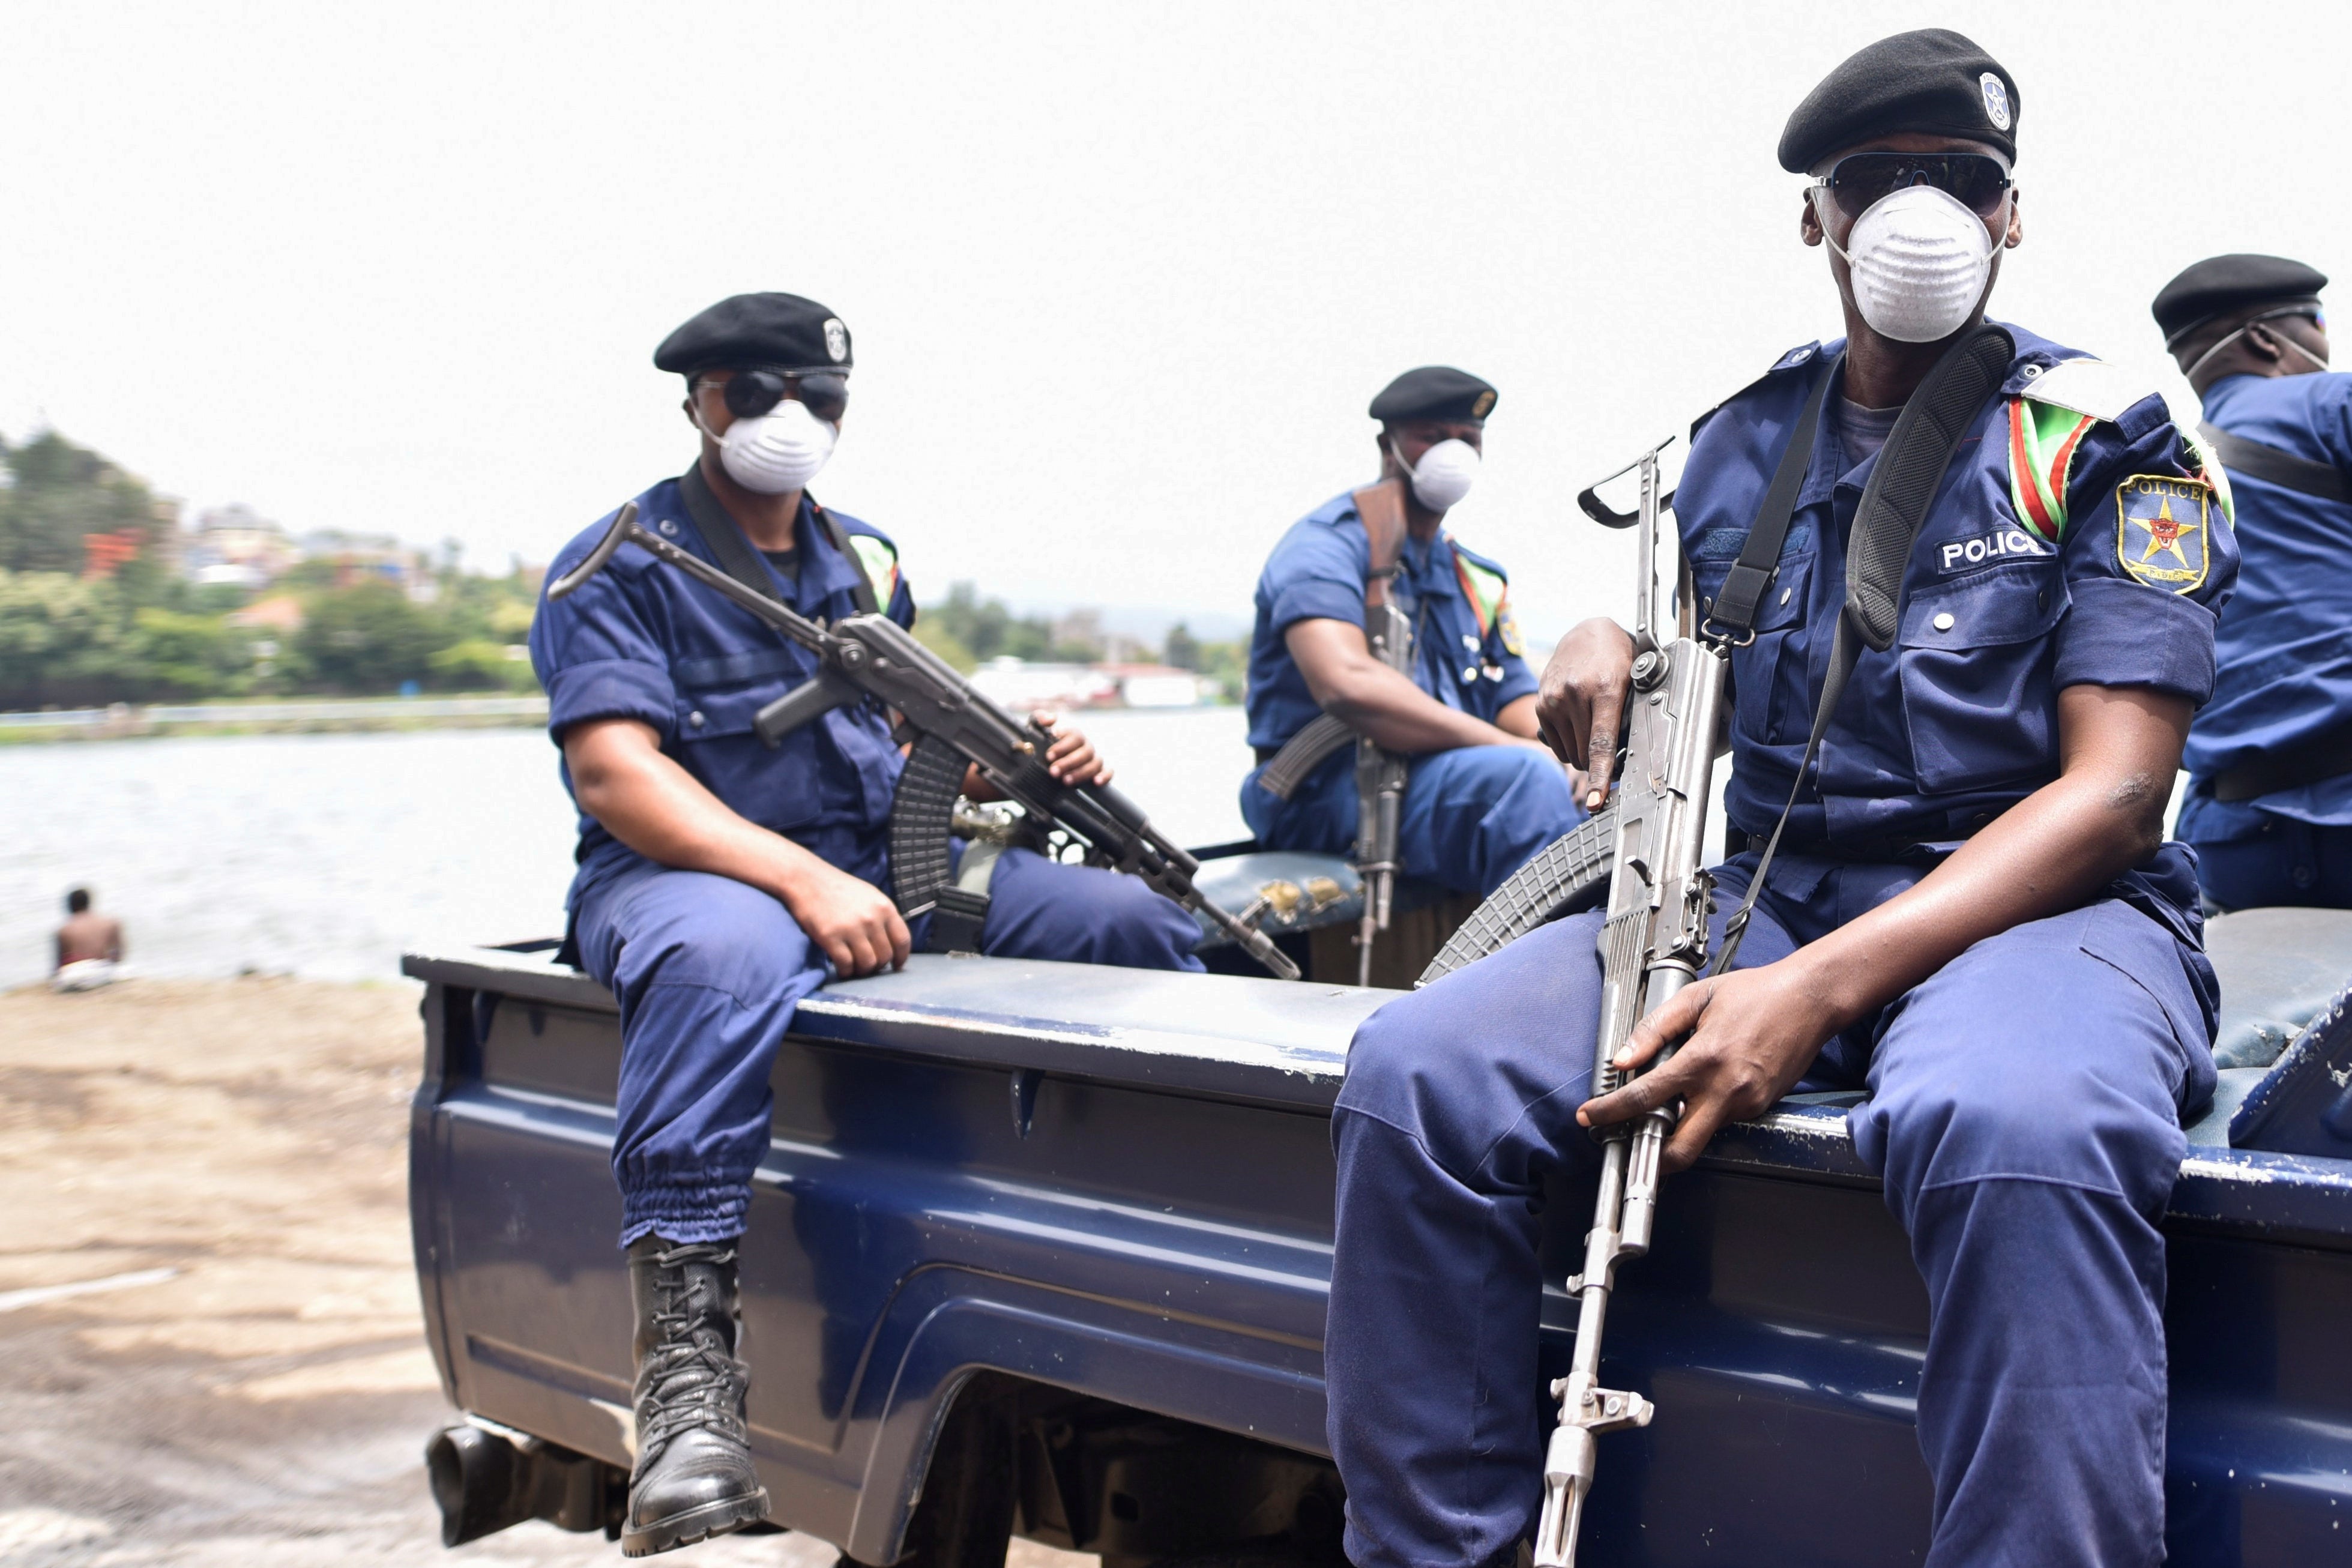 Police wearing masks and holding guns sit in the back of a pickup